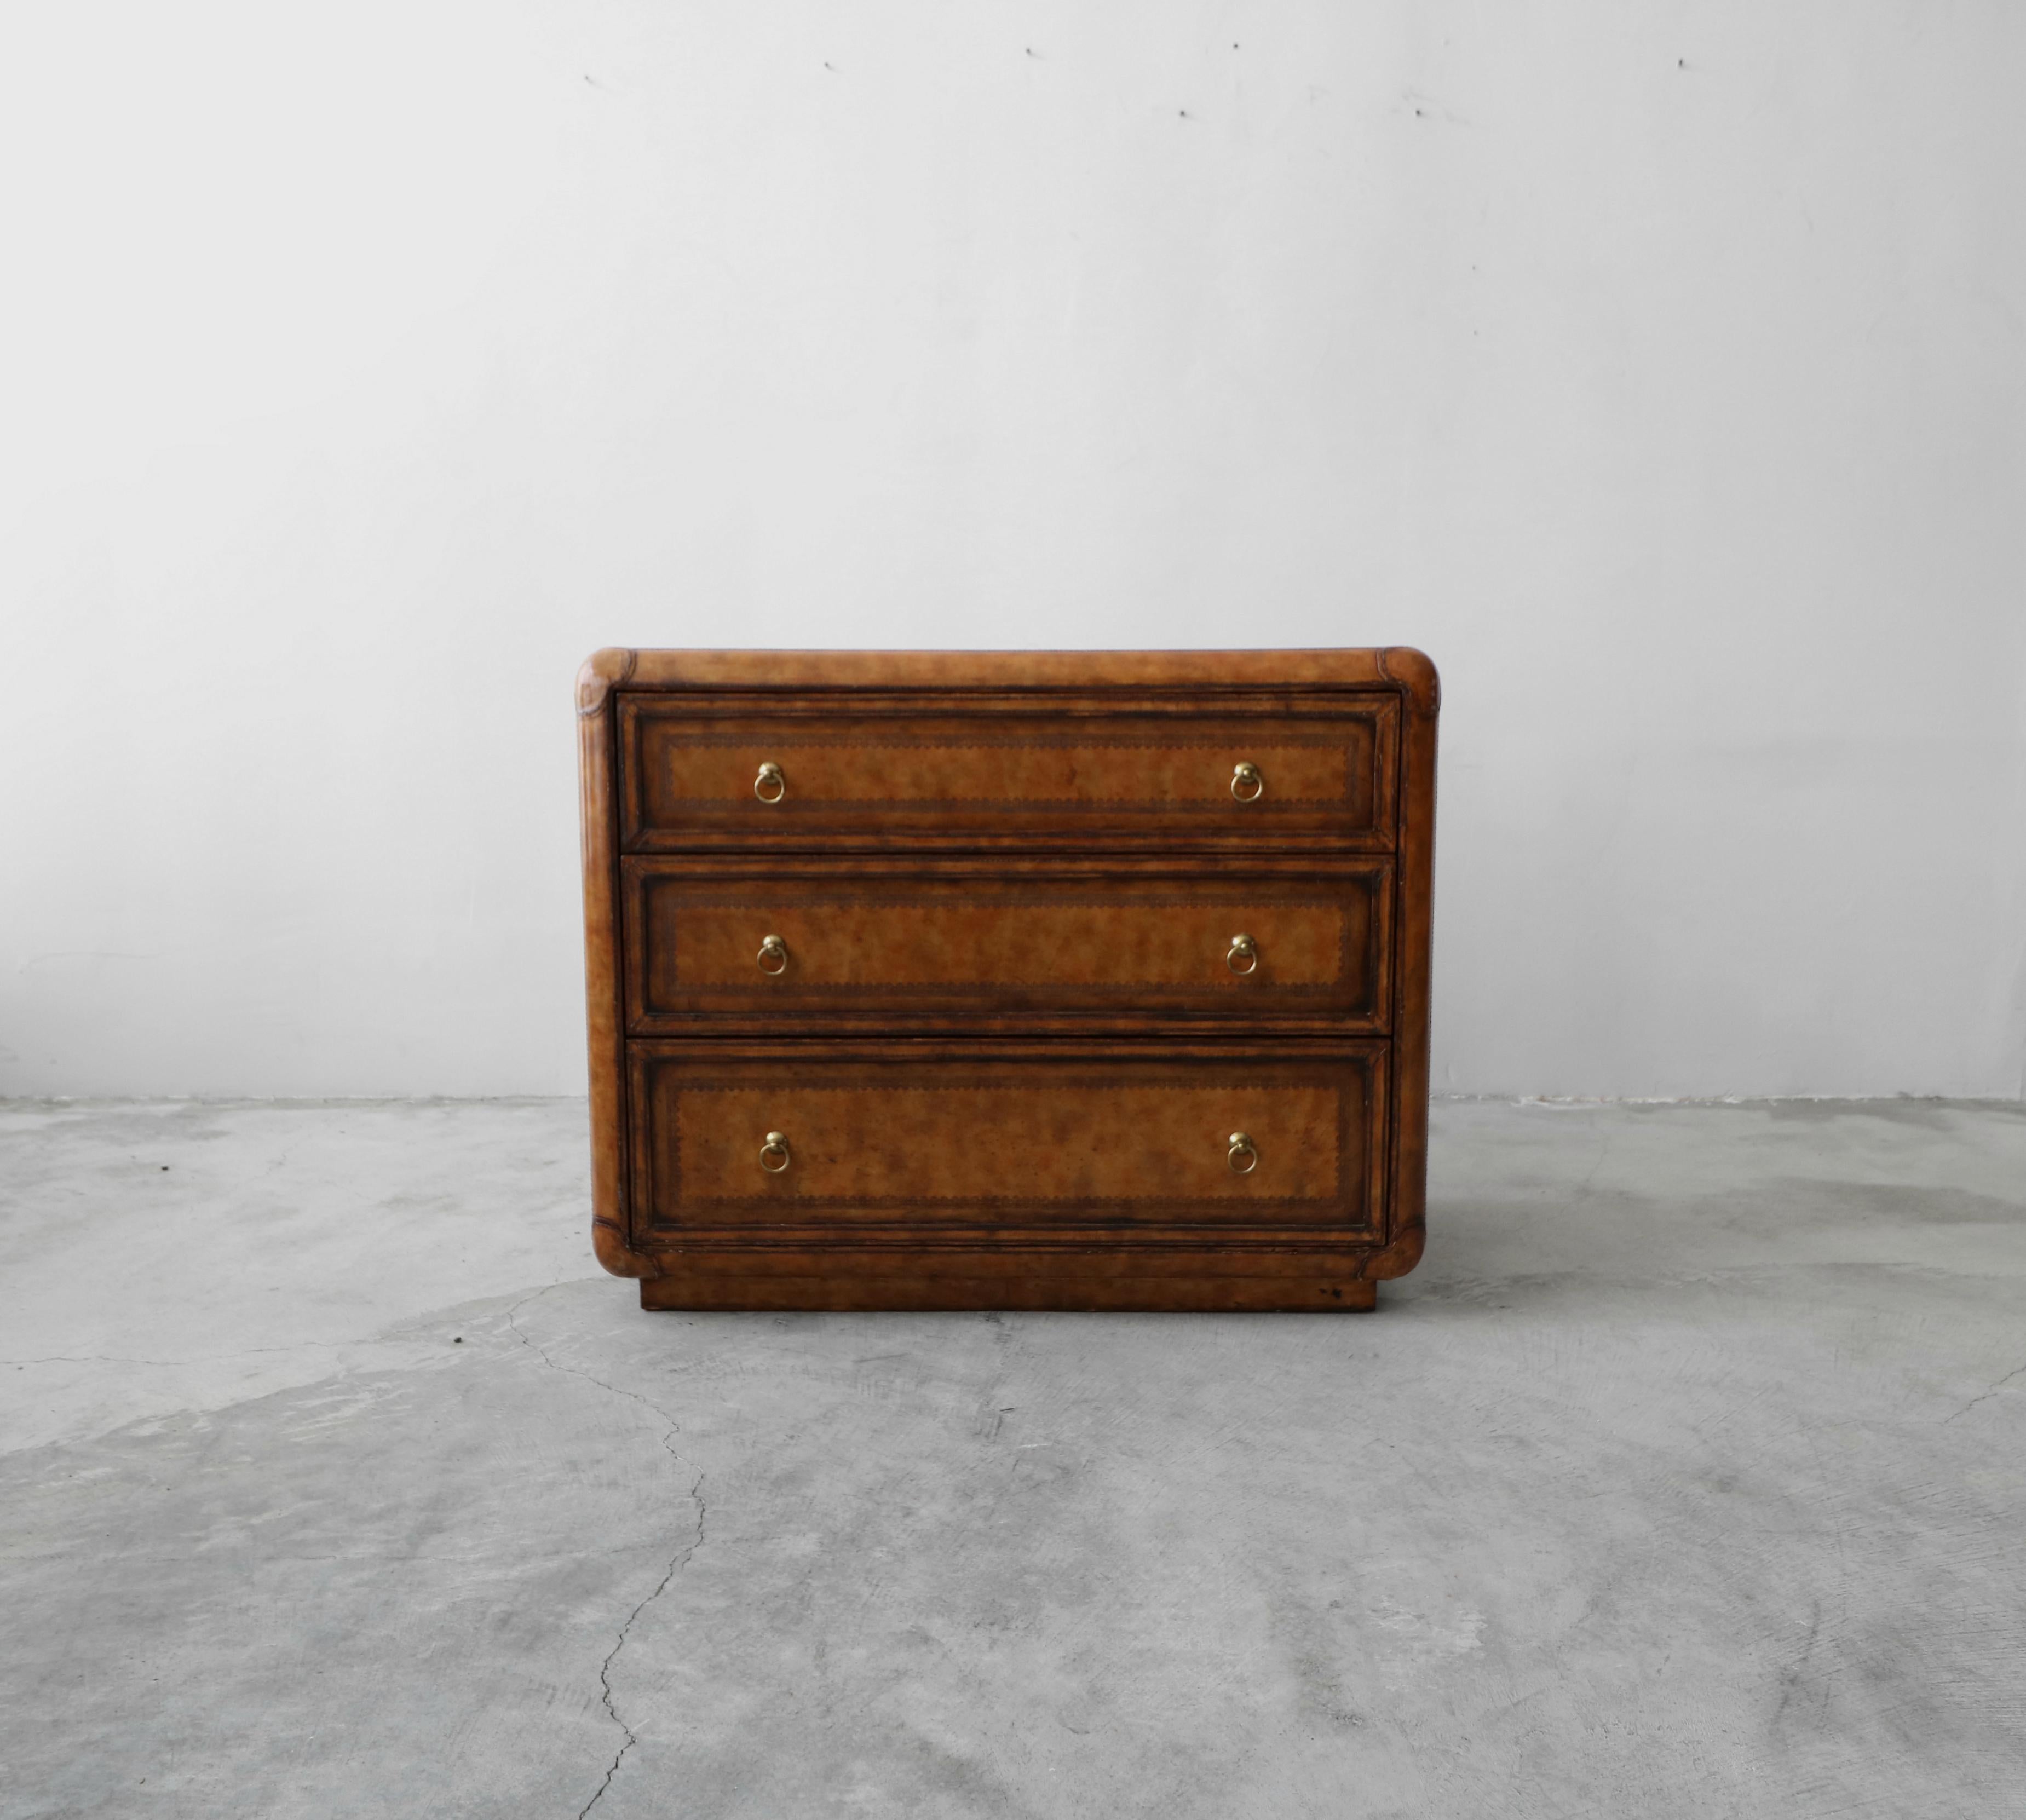 American Classical Leather and Brass Dresser Chest by Maitland-Smith